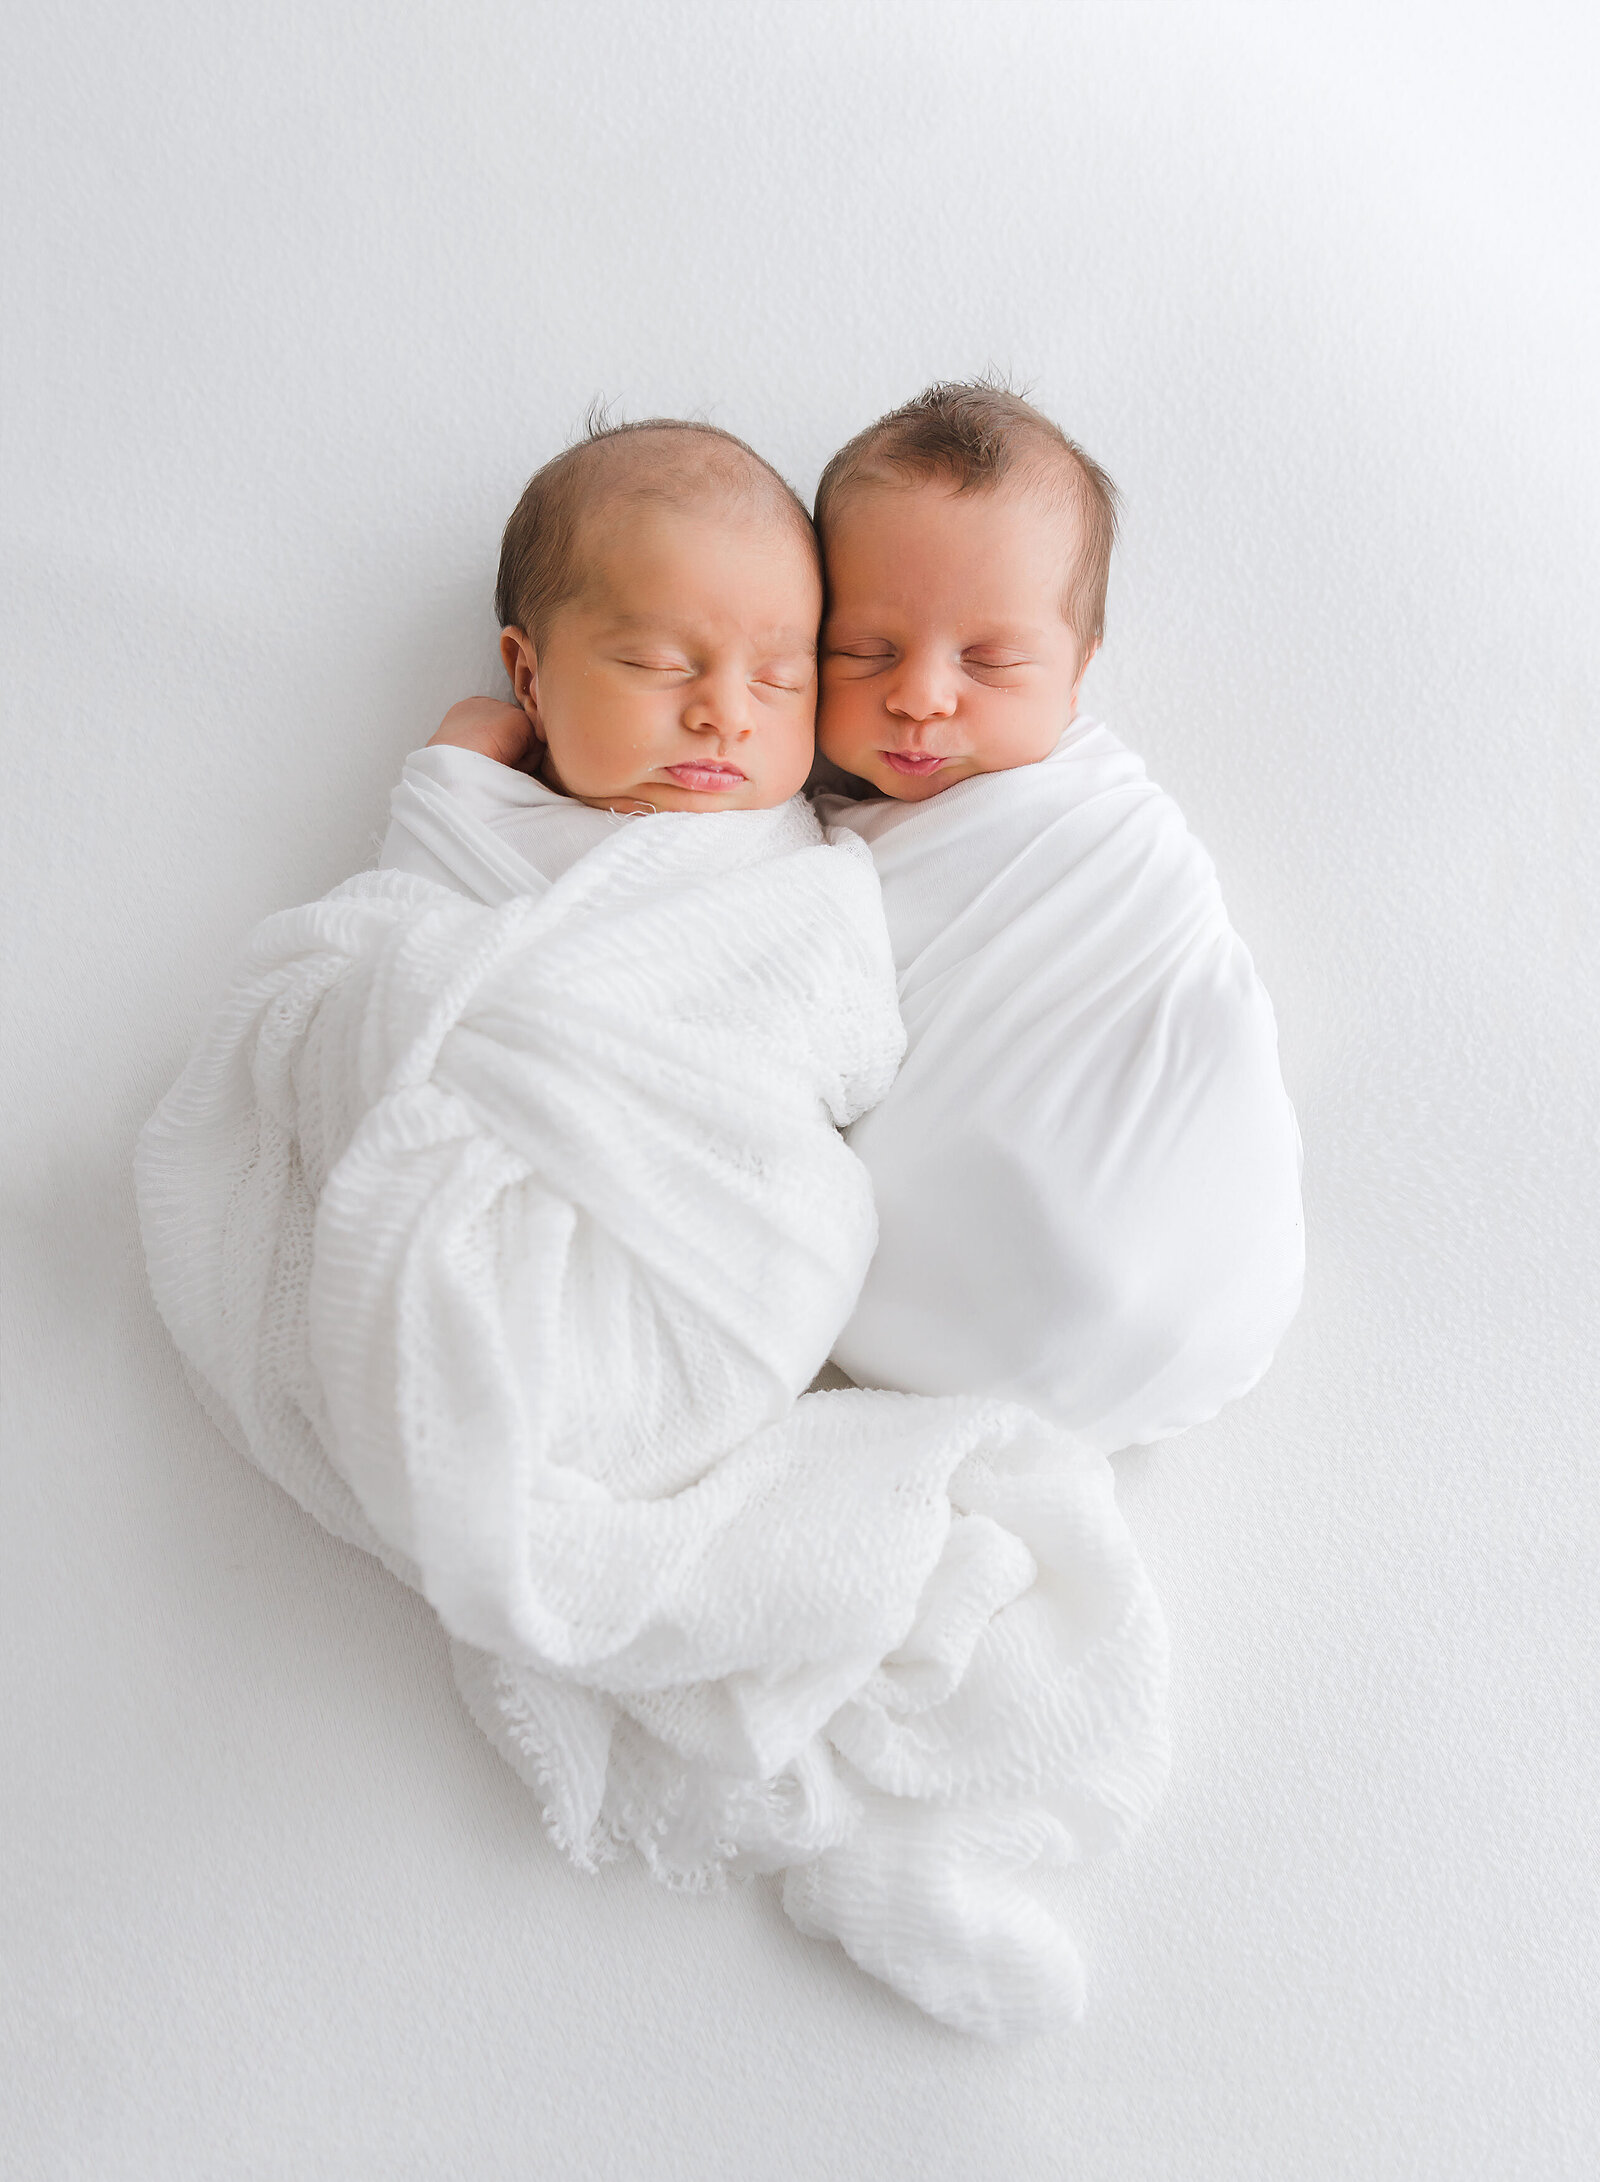 twins wrapped in white